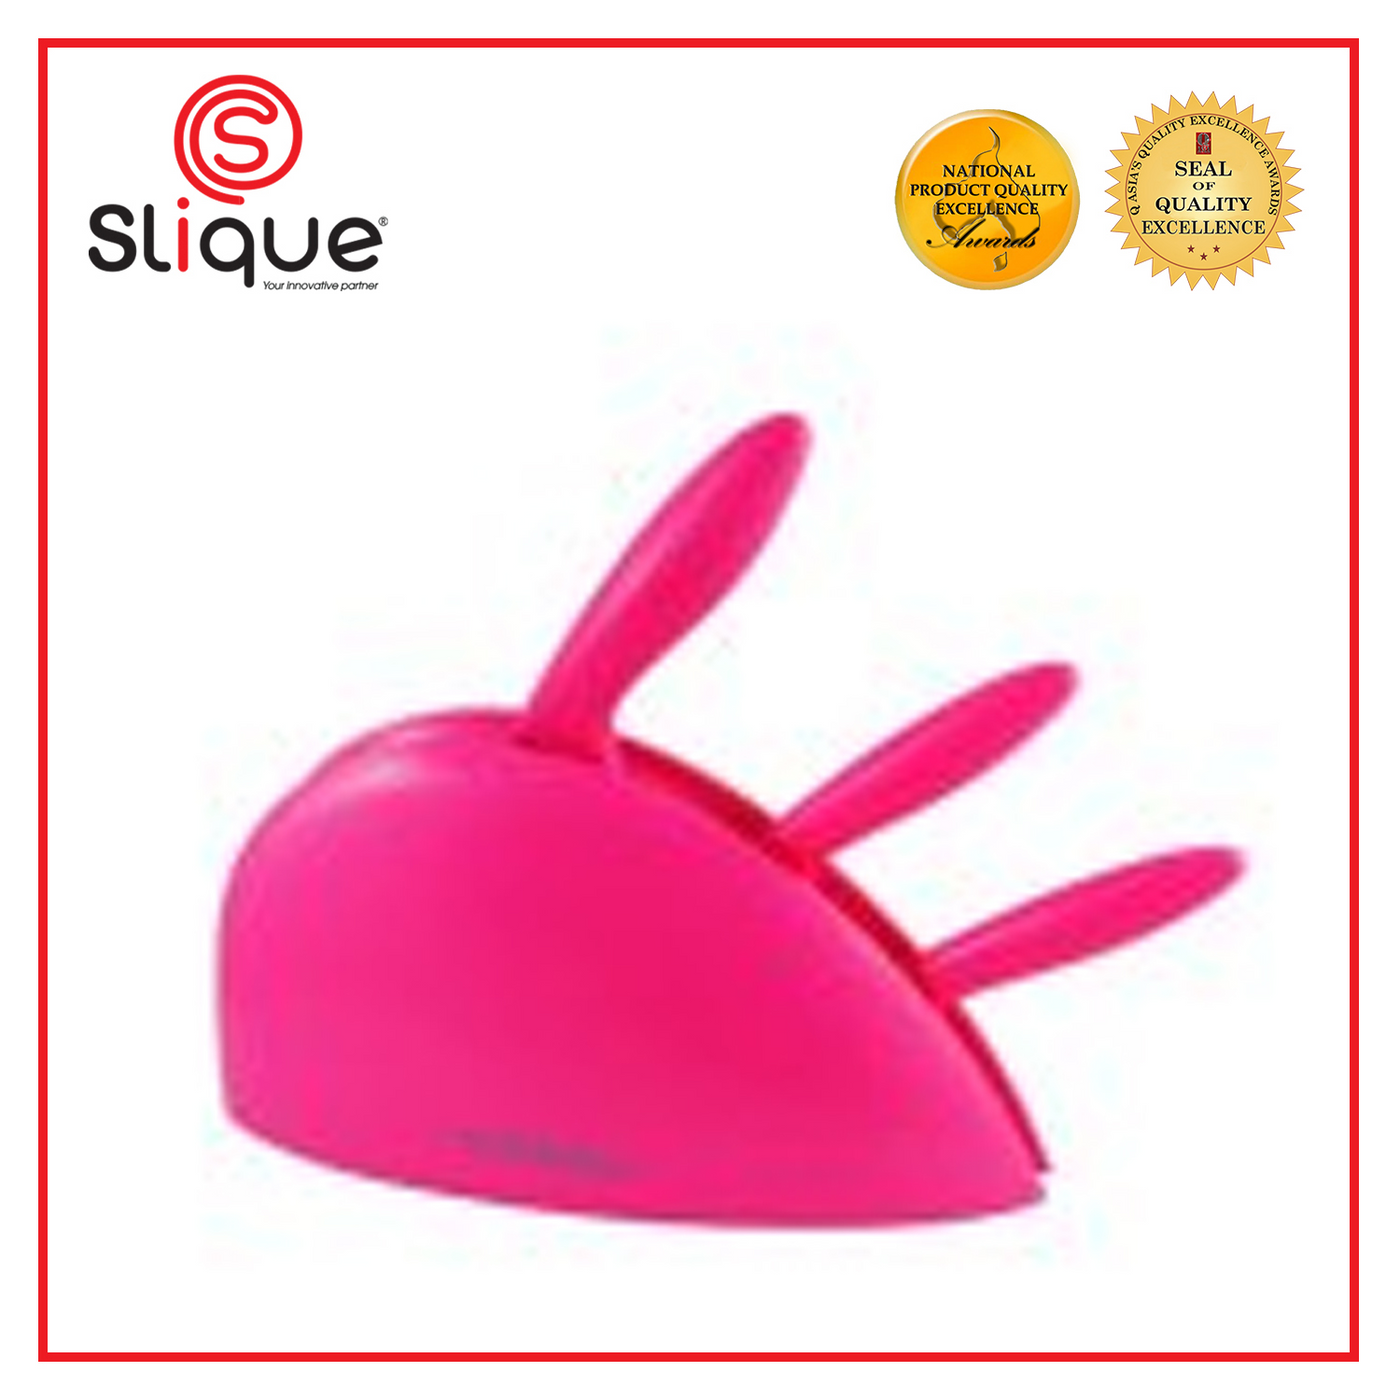 SLIQUE Premium Stainless Steel Kitchen Knife Block Set of 3 Amazing Gift Idea For Any Occasion! (Pink)